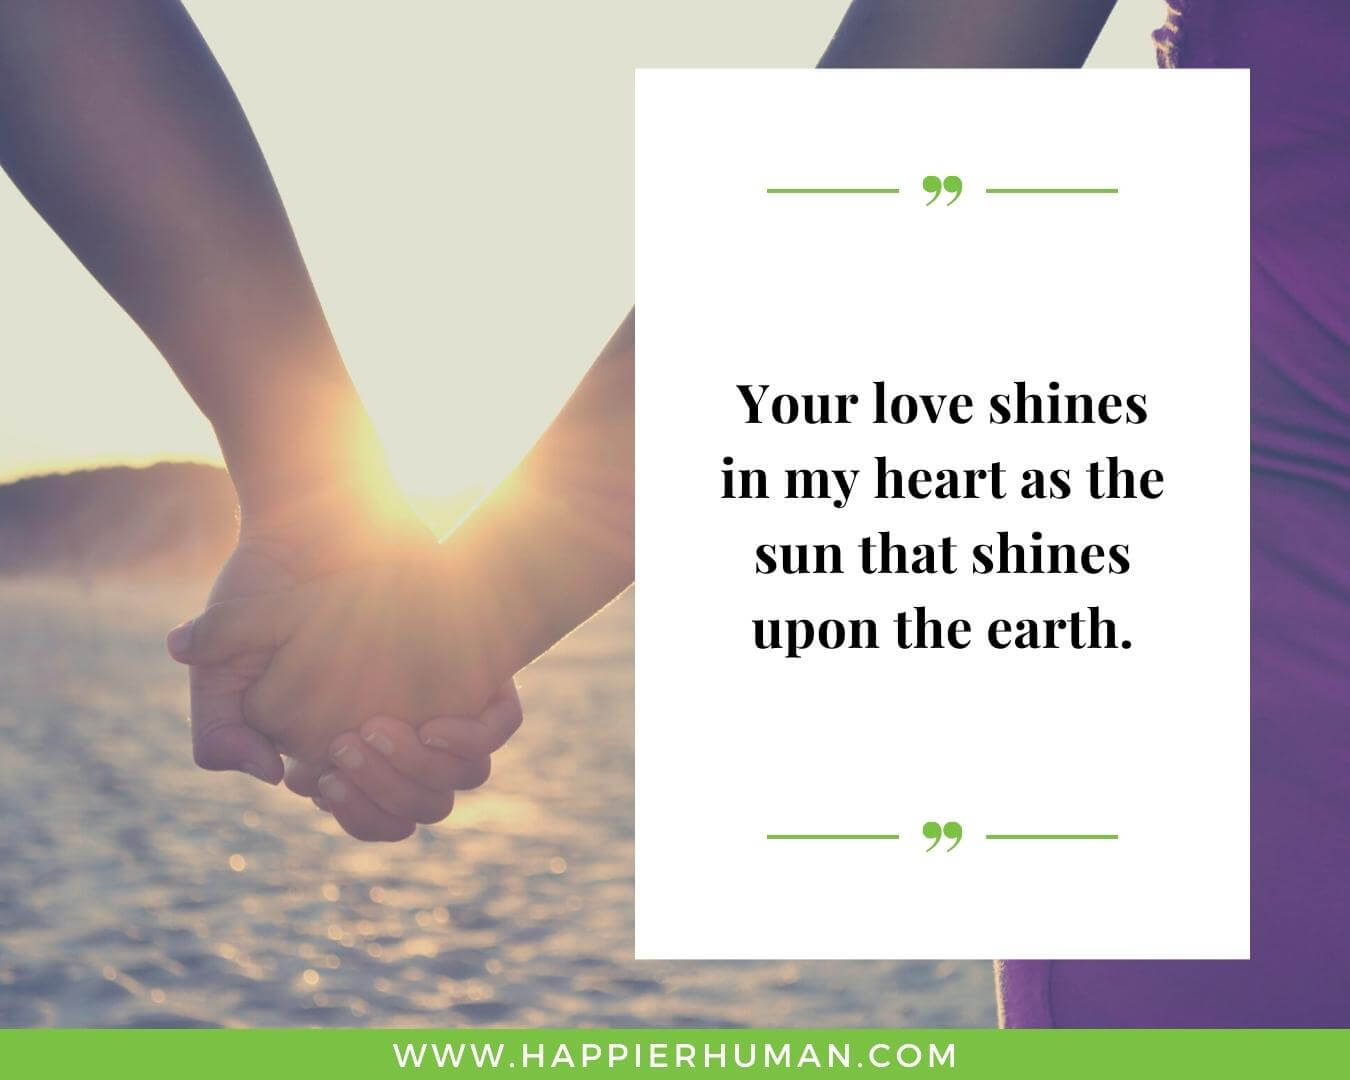 Short Love Quotes for Her - “Your love shines in my heart as the sun that shines upon the earth.”